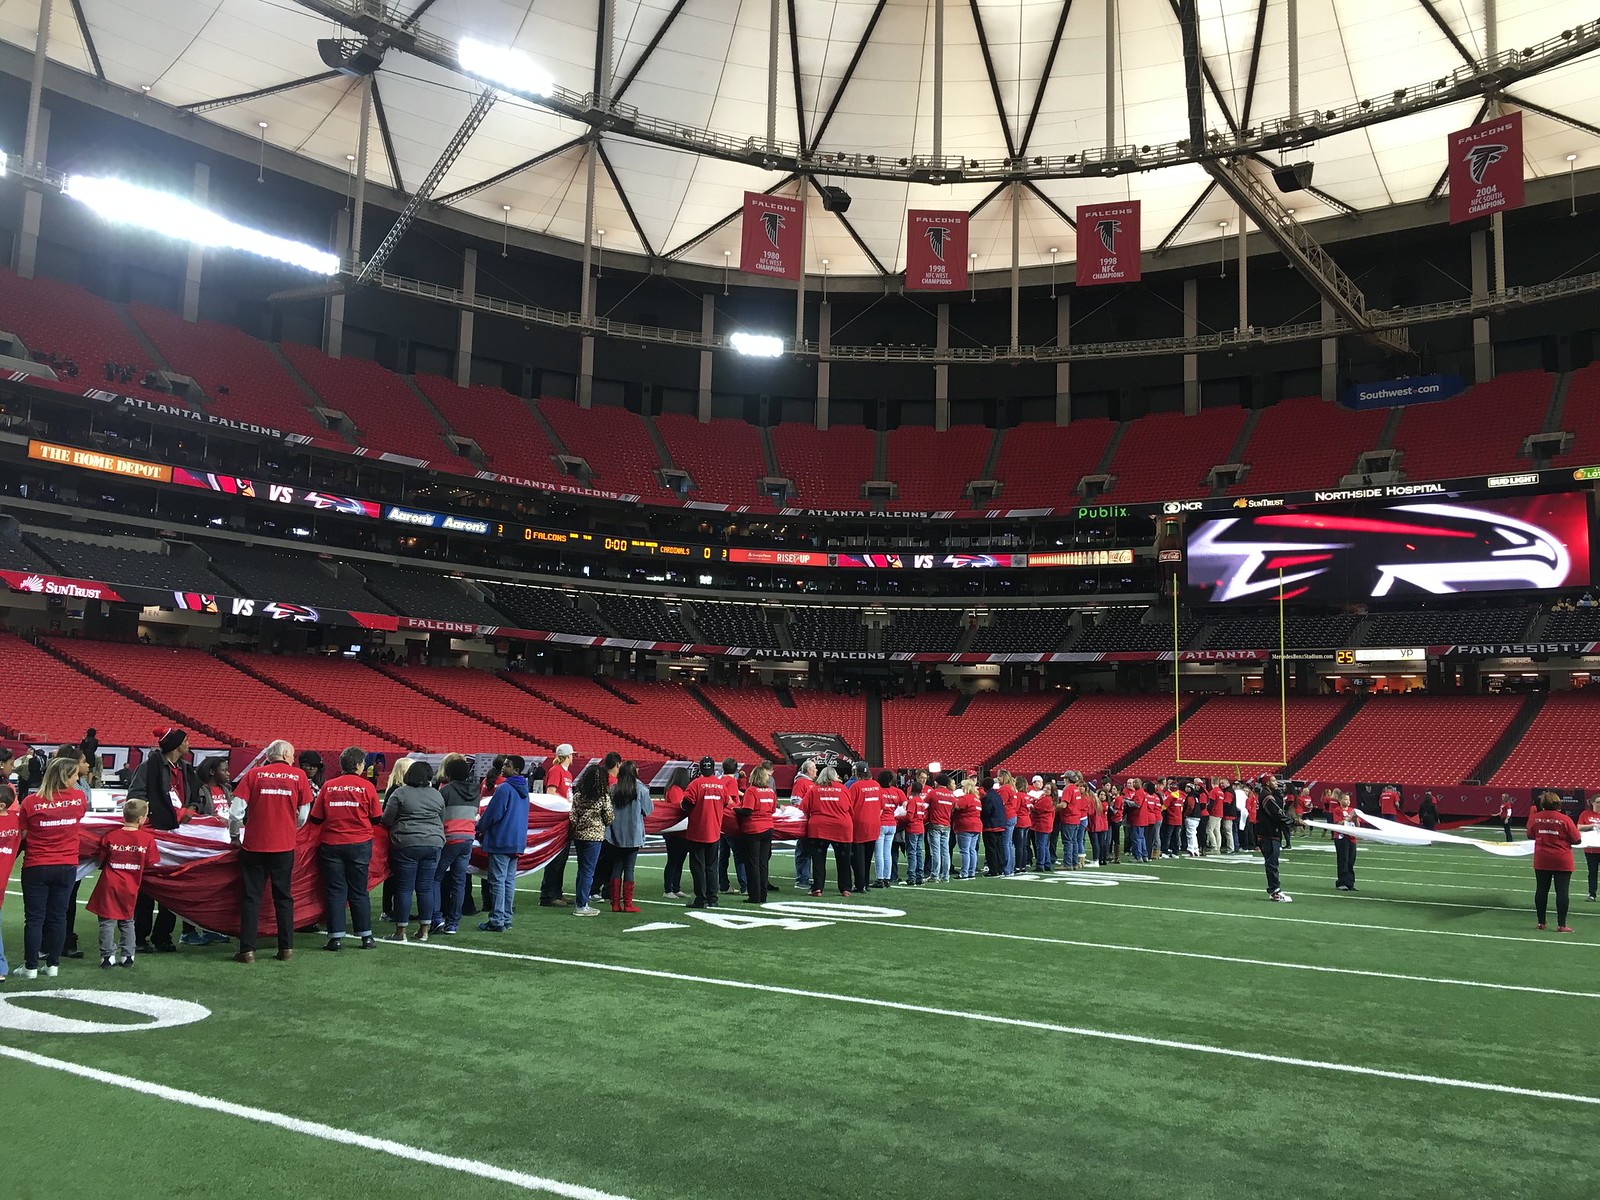 2016_T4T_ATL Falcons Game Day 16